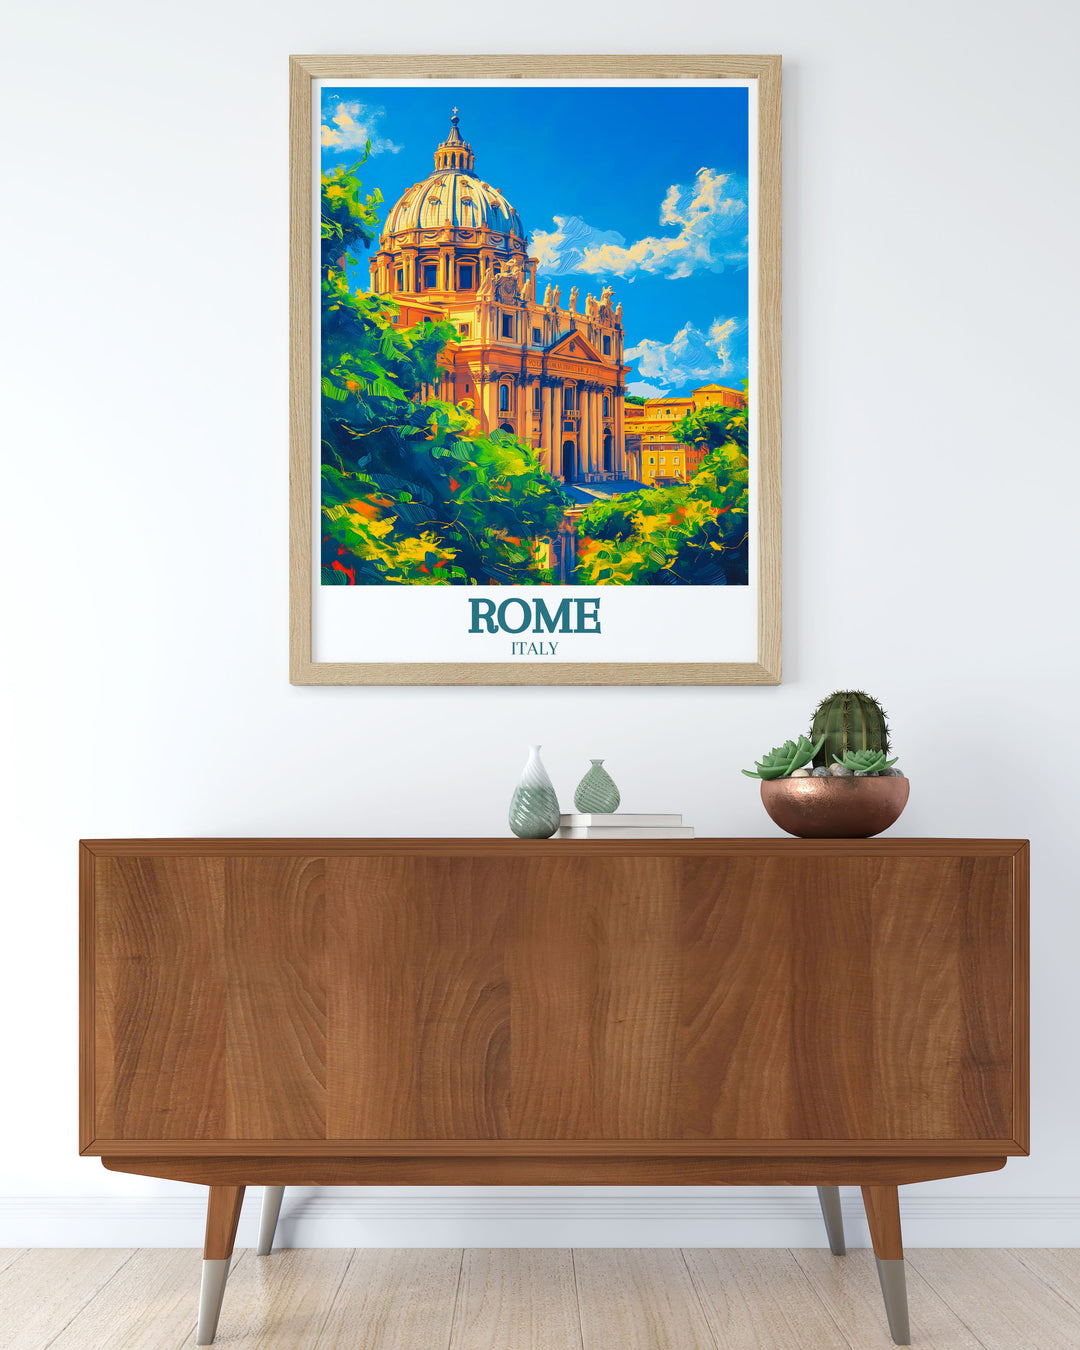 Elegant Rome poster showcasing the iconic St Basilica Vatican City perfect for those who appreciate historical landmarks and sophisticated decor makes an excellent gift for travel enthusiasts and history buffs alike.